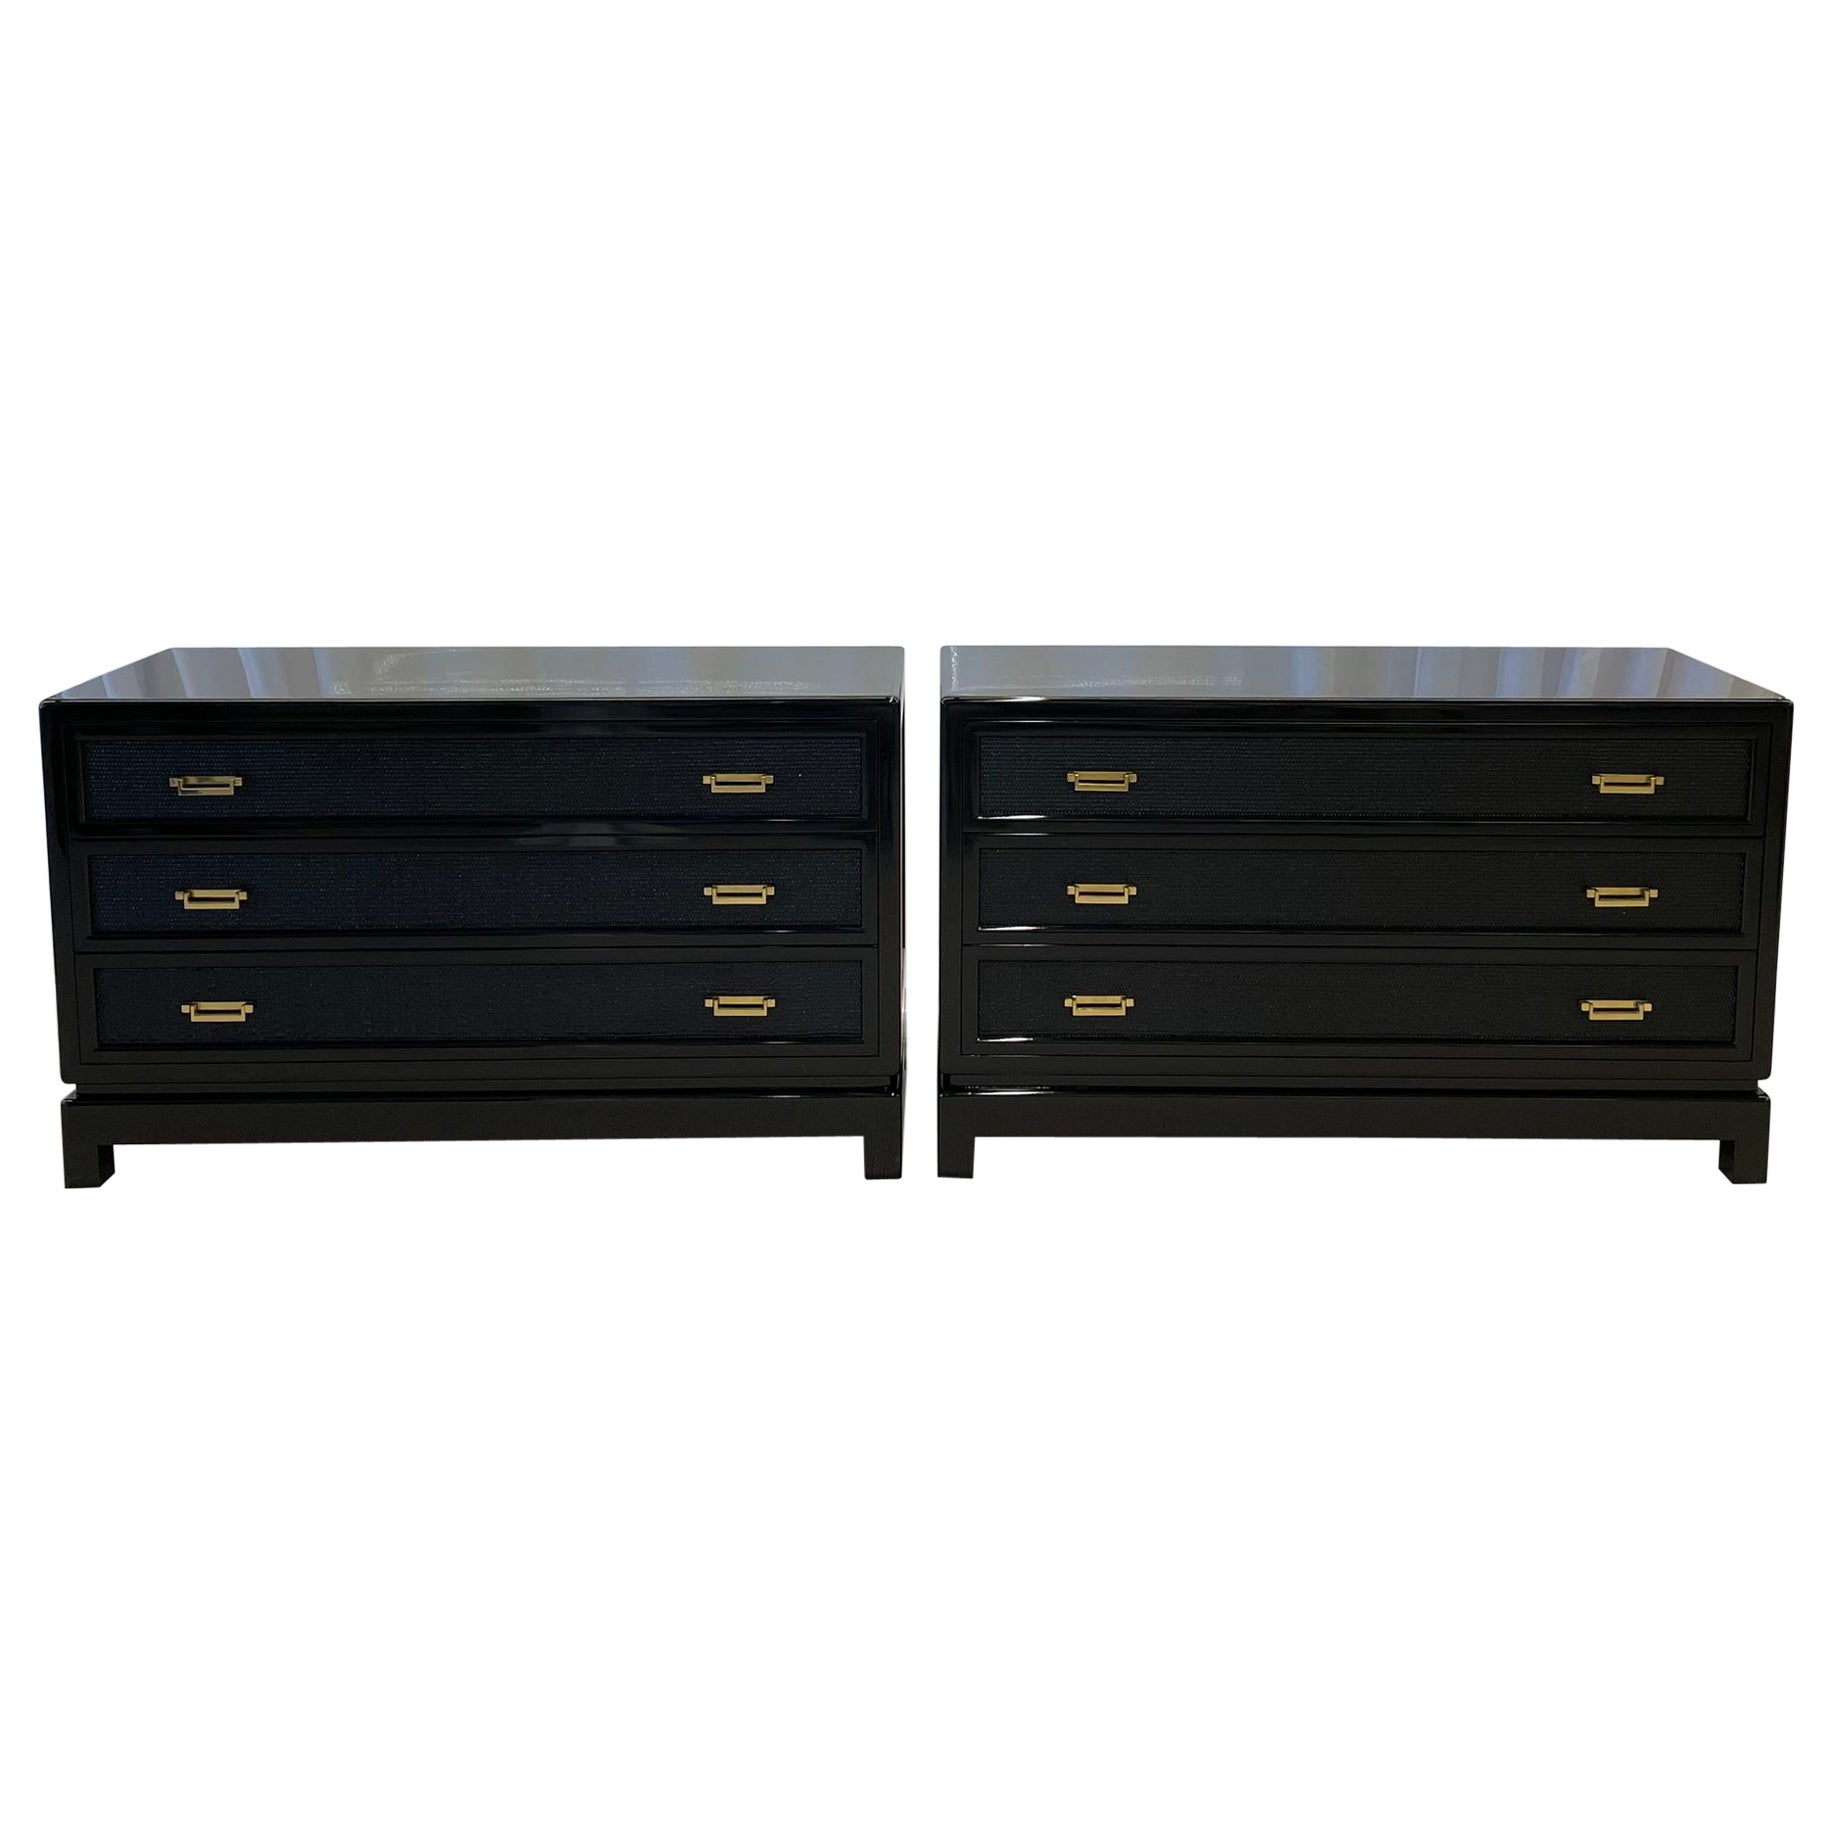 Pair of Mid-Century Modern Cabinets, Chests, Nightstands, Karl Springer Style For Sale